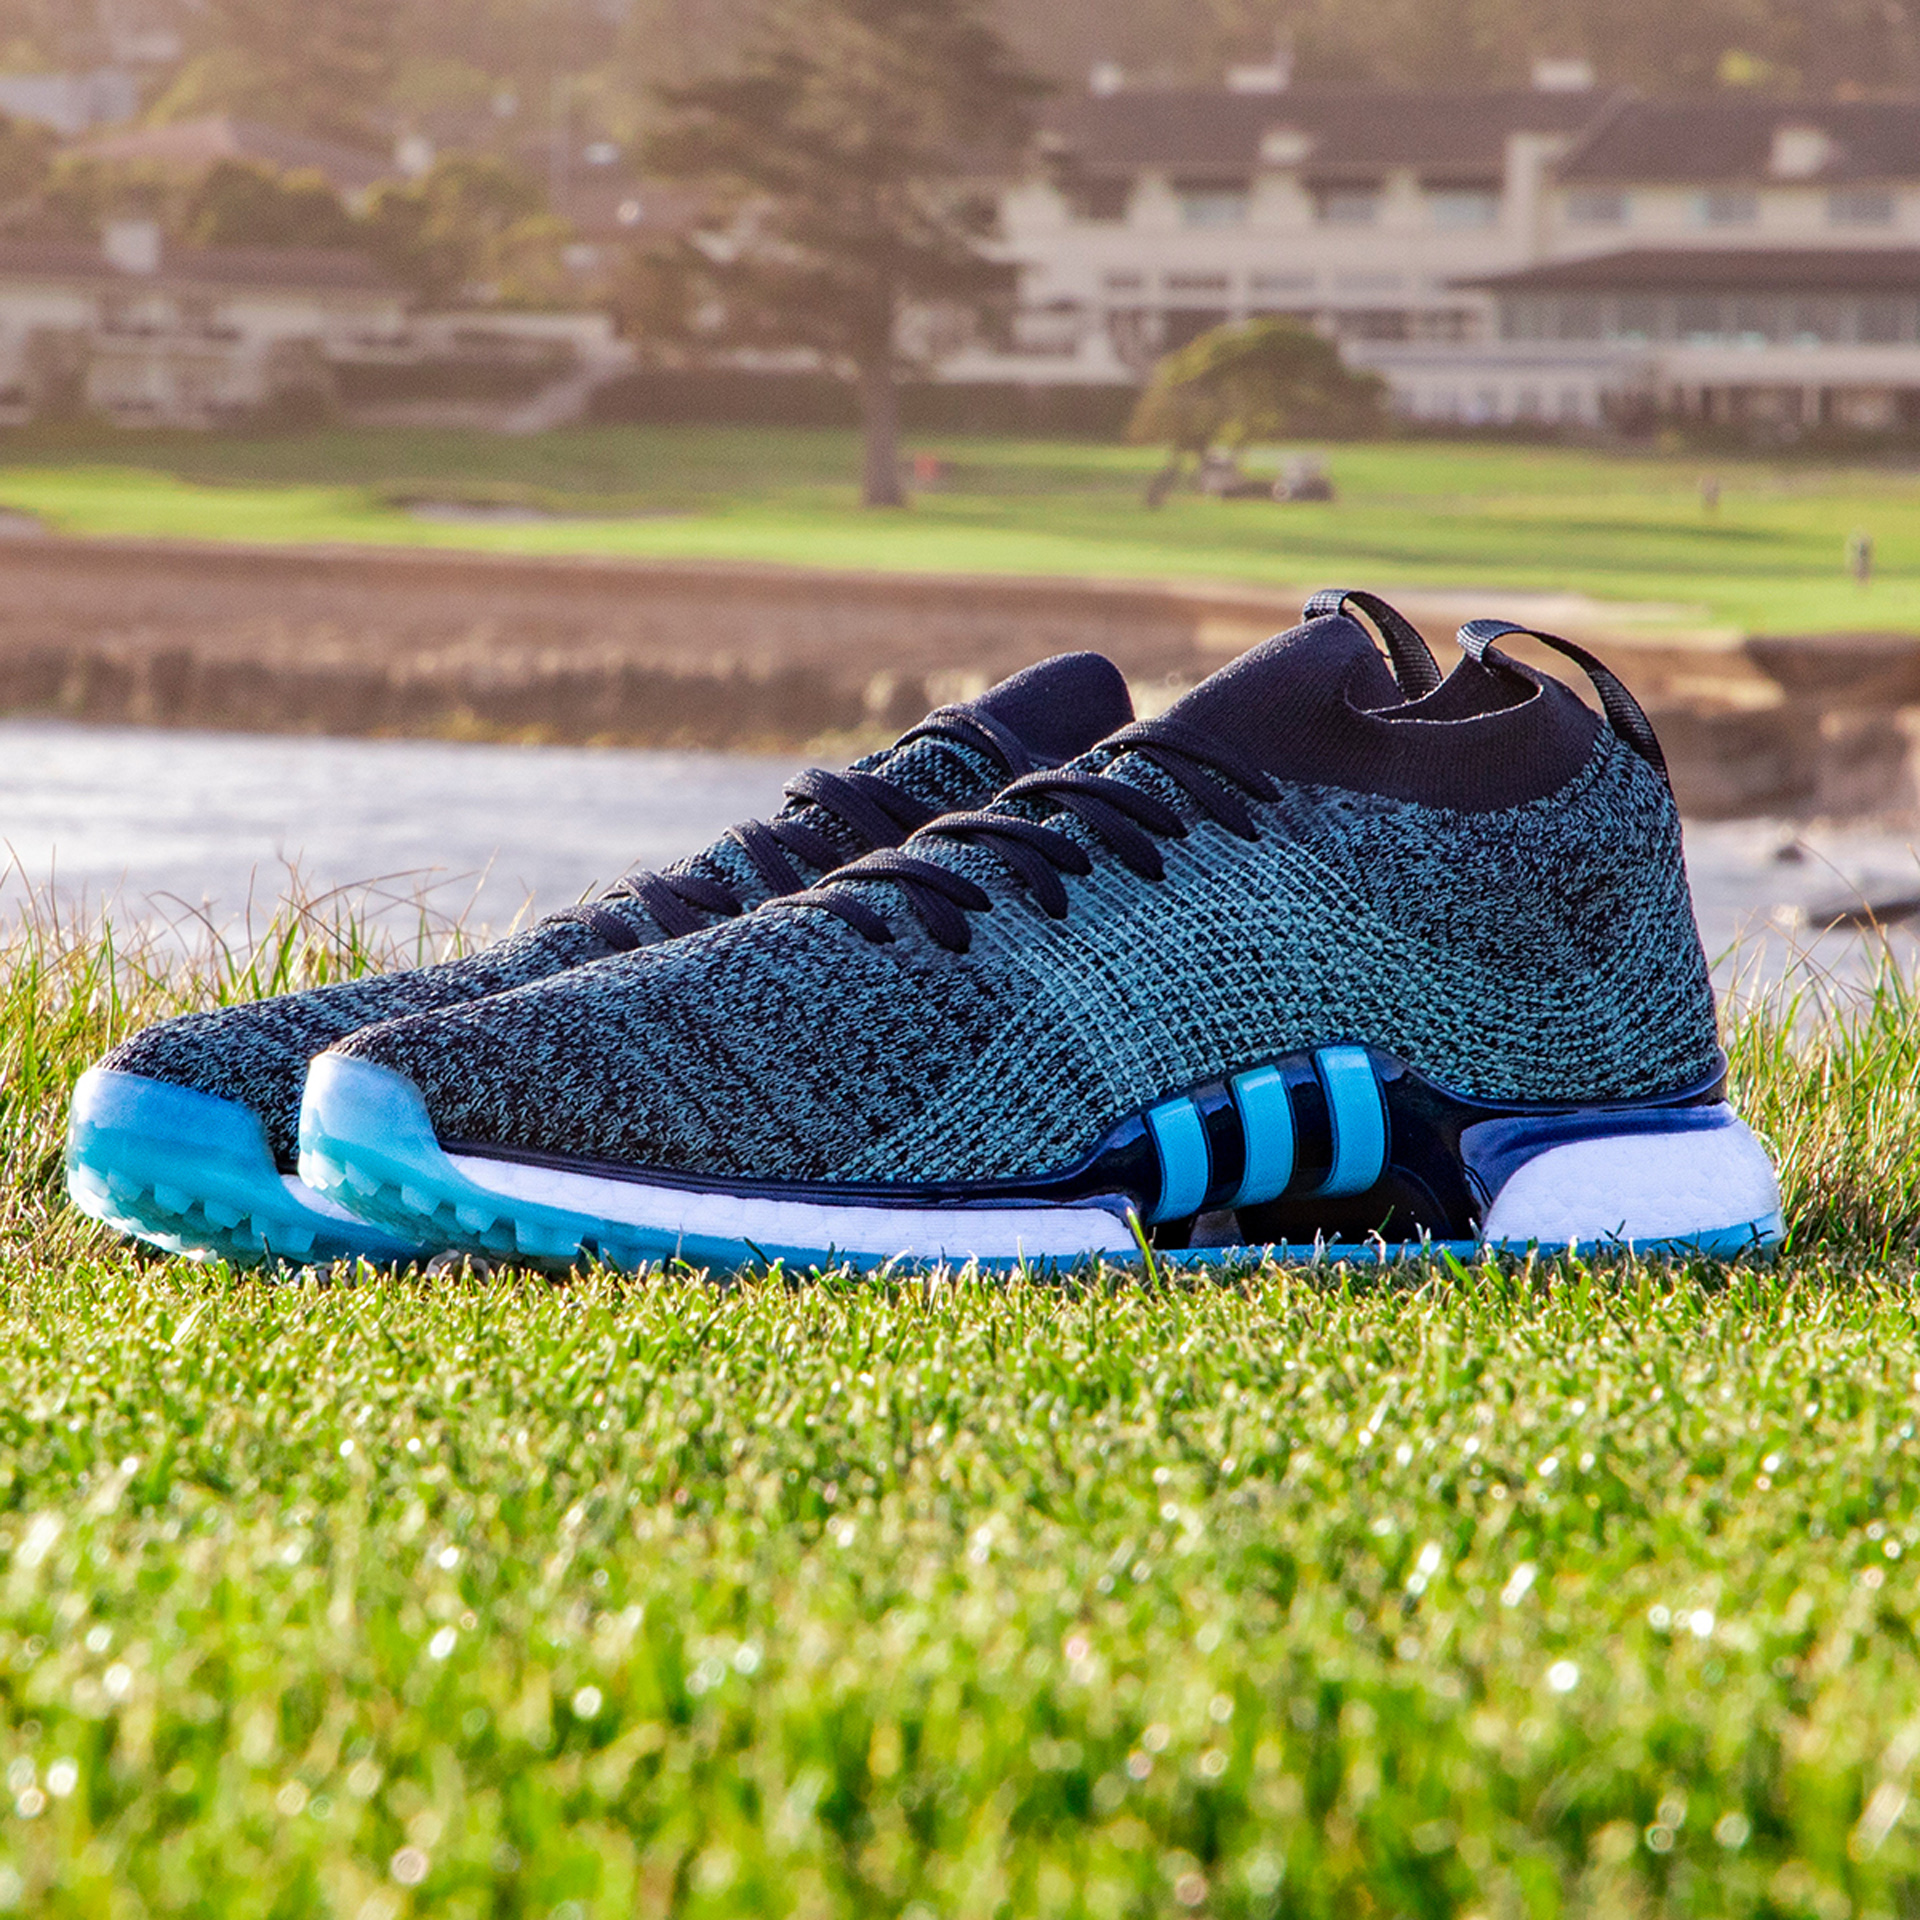 erupción Amargura frecuencia Adidas' new TOUR360 XT golf shoes are made with recycled plastic waste |  Golf Equipment: Clubs, Balls, Bags | Golf Digest